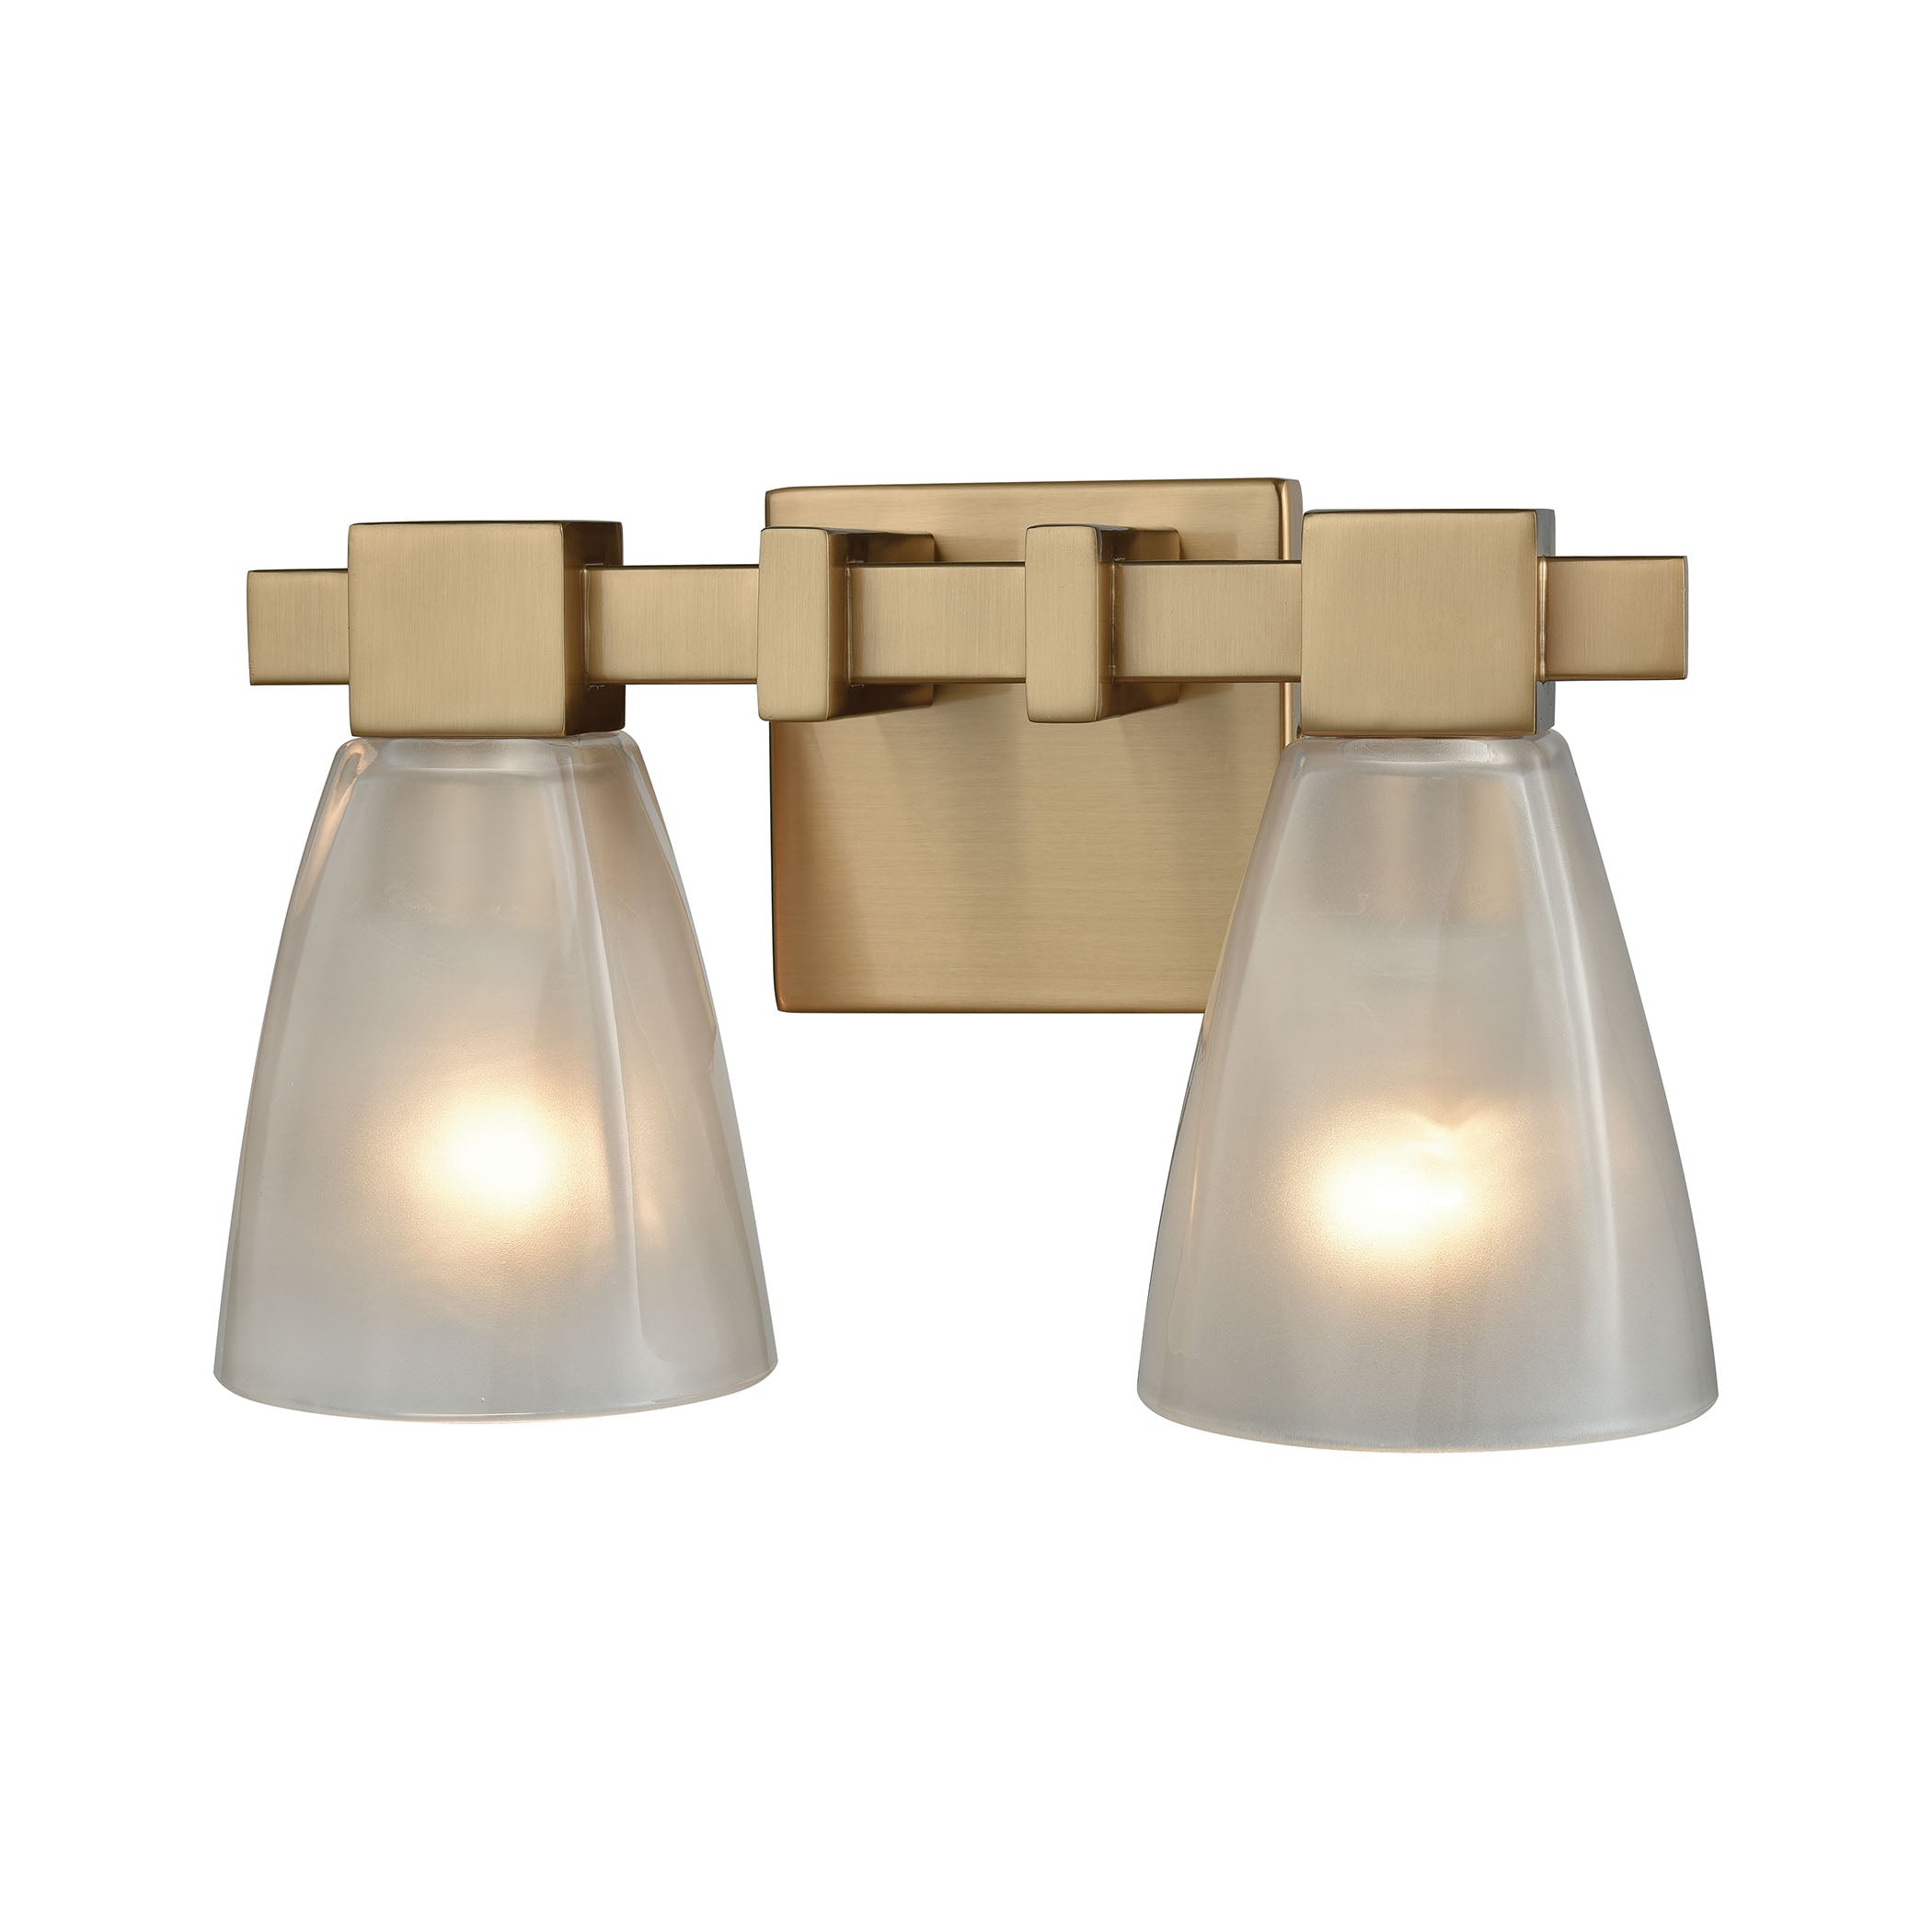 ELK Lighting 11991/2 Ensley 2-Light Vanity Lamp in Satin Brass with Square-to-Round Frosted Glass